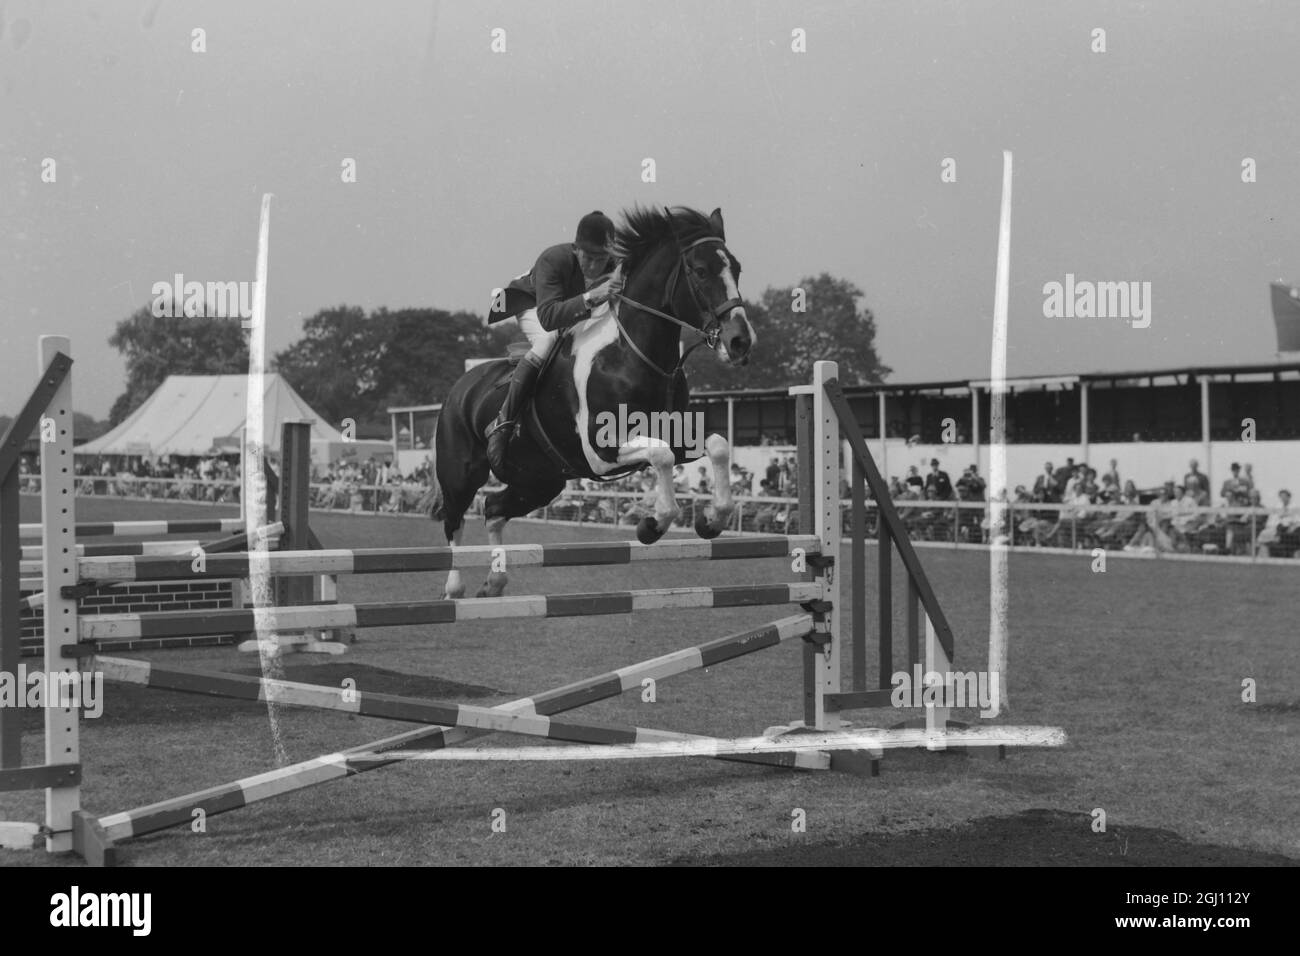 HORSEJUMPING DIMONO 7 WITH ALAN OLIVER AT RICHMOND FOXHUNTER 26 MAY 1961 Stock Photo